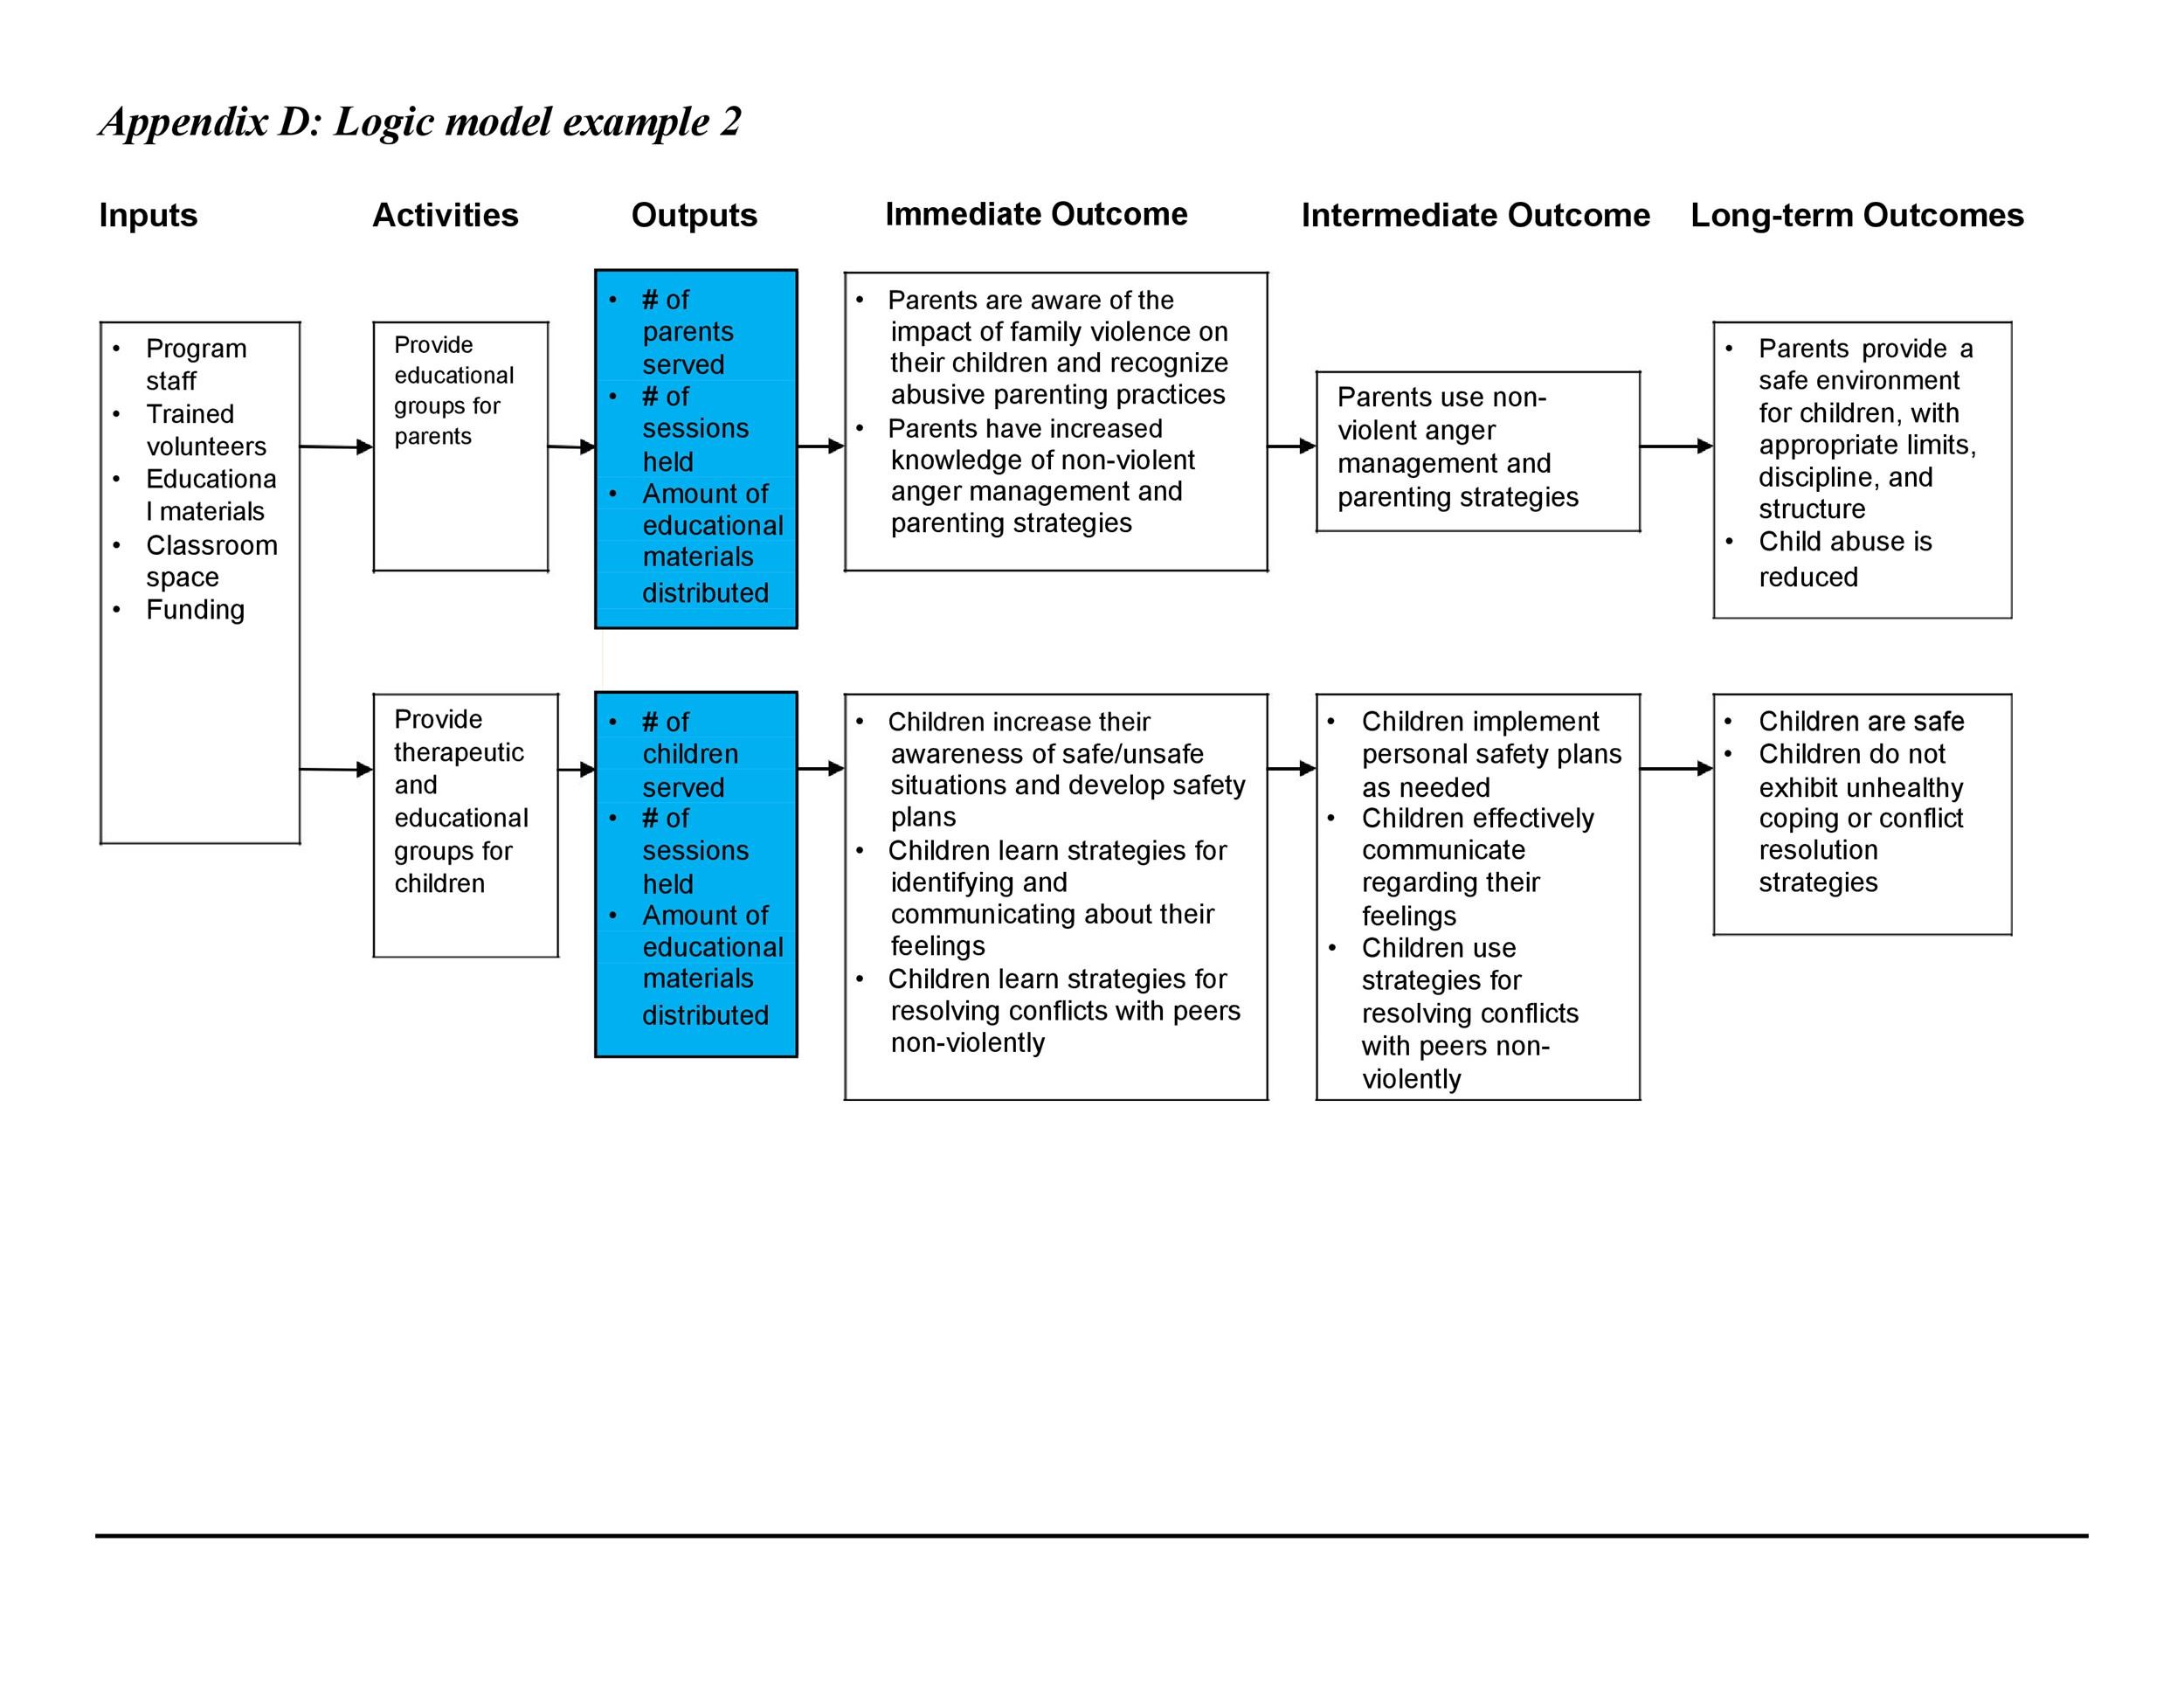 More than 40 Logic Model Templates Examples ᐅ TemplateLab